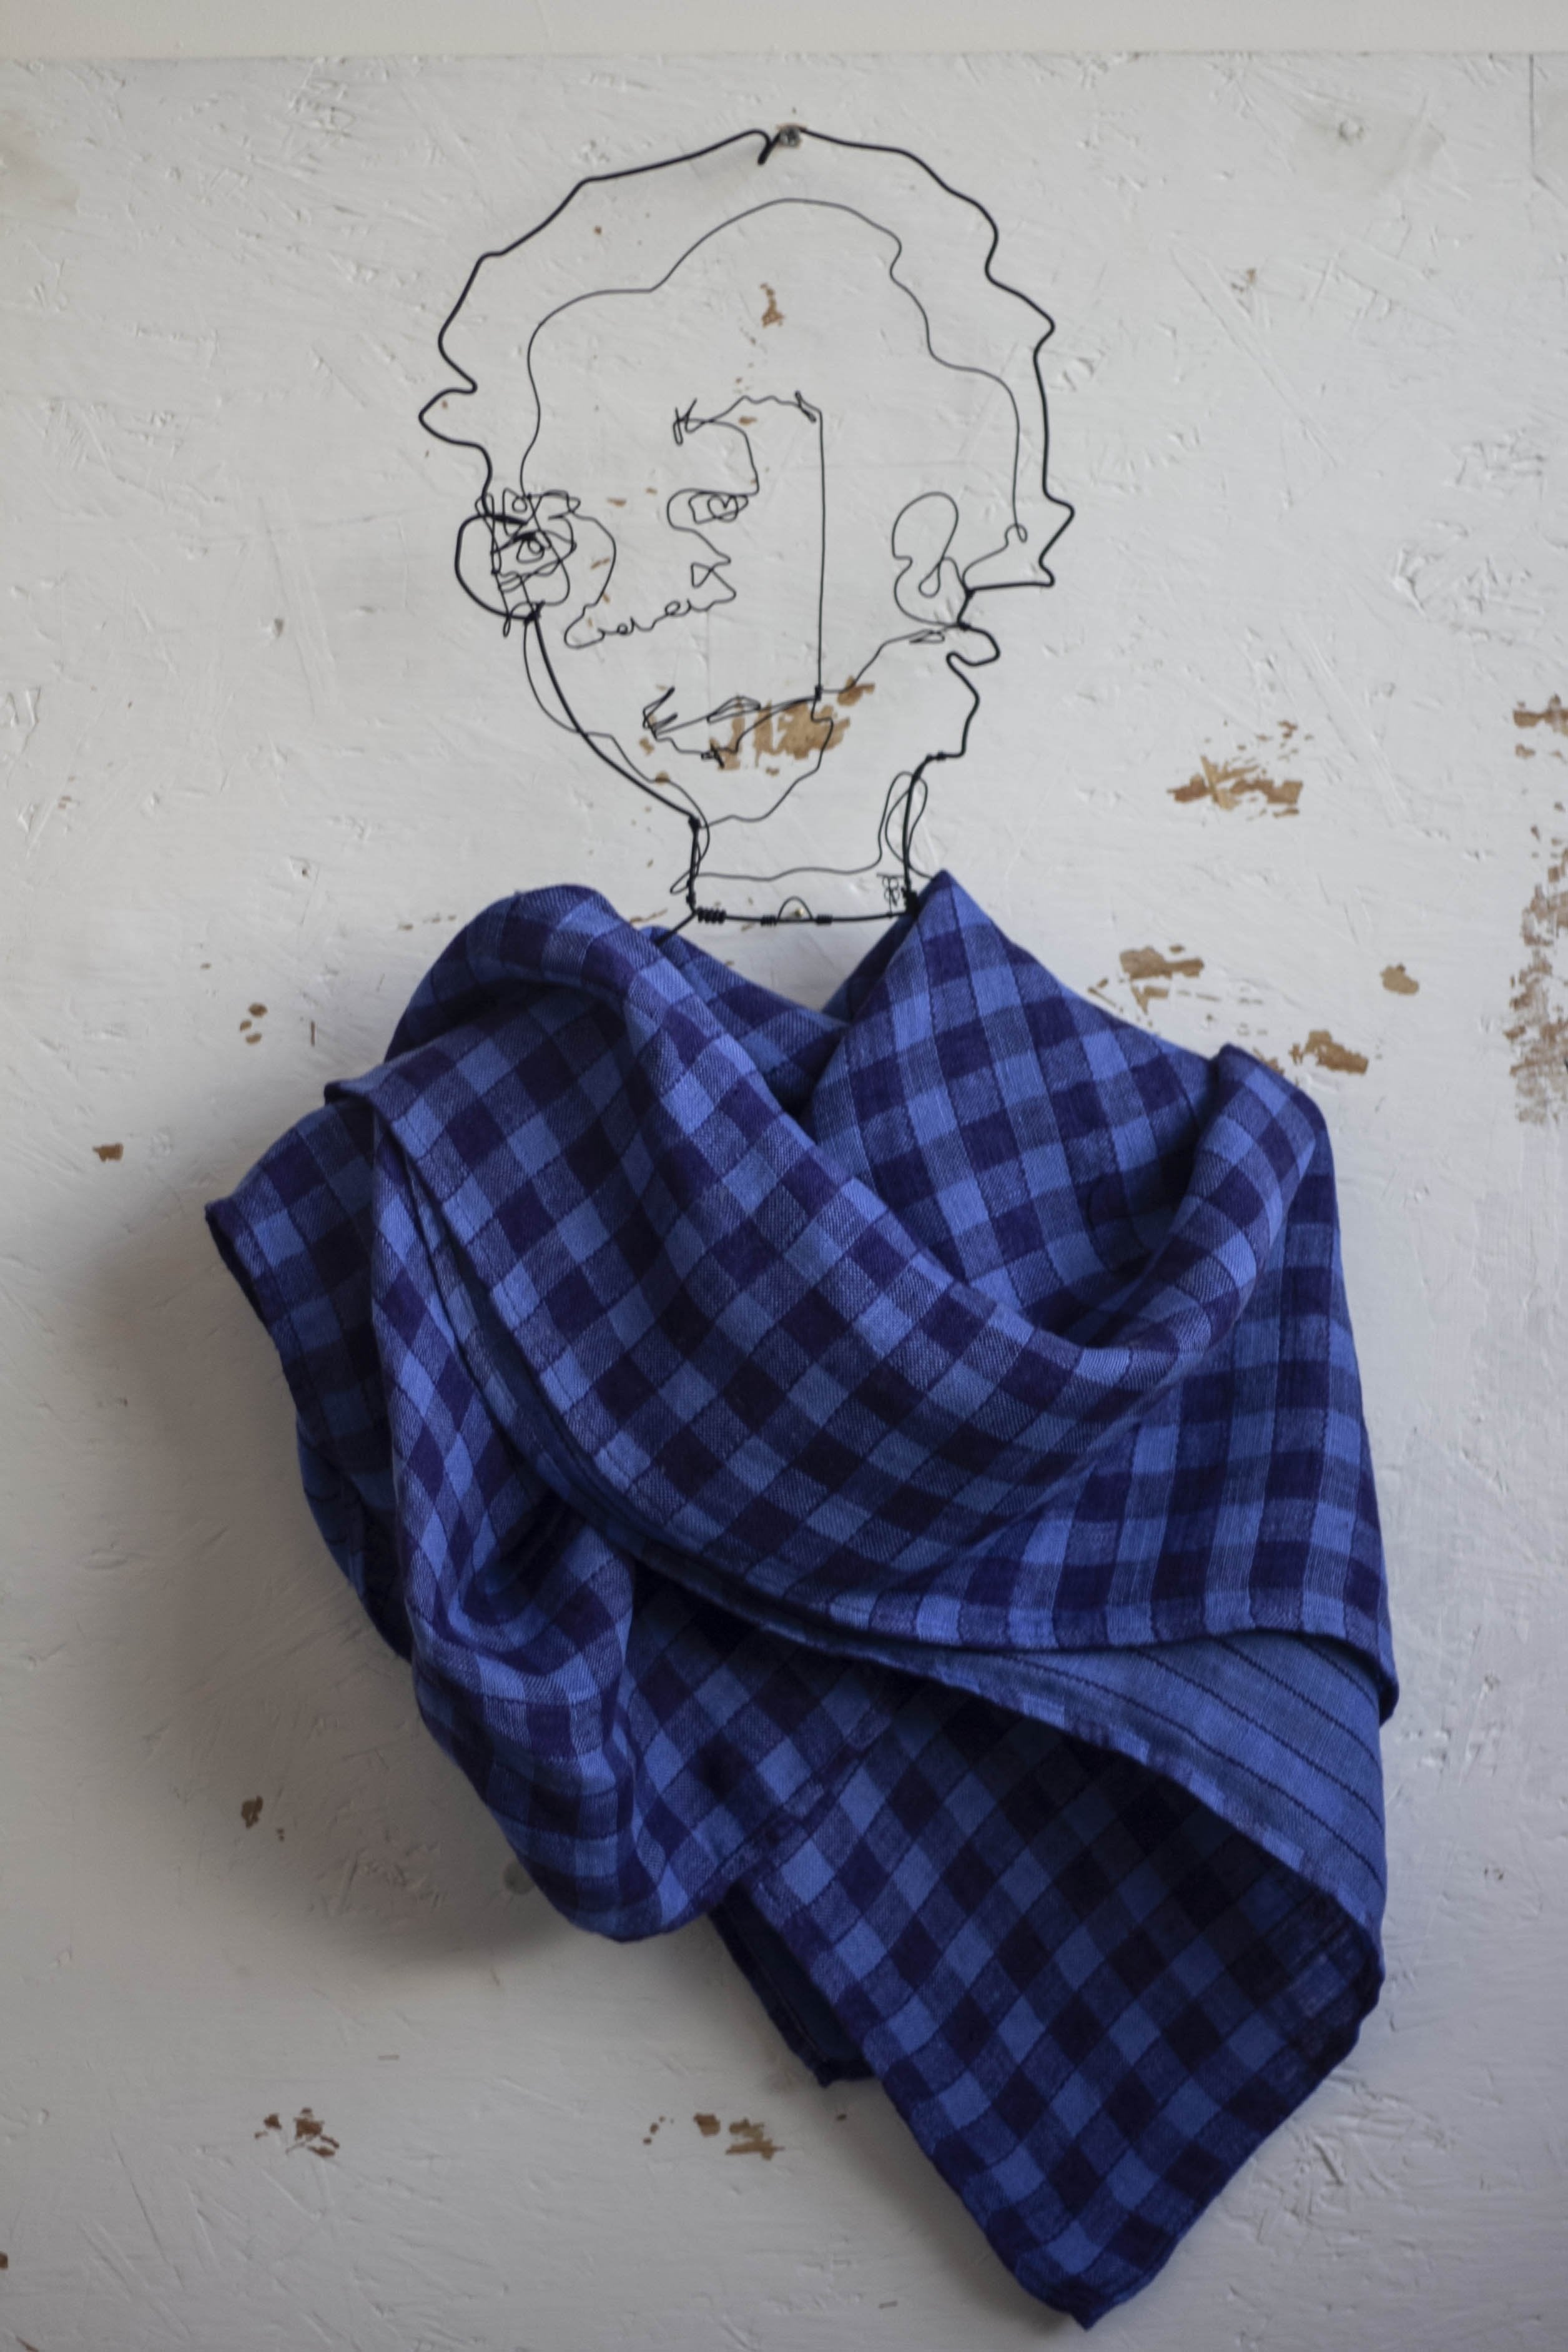 Pocket square/scarf made from 100% linen